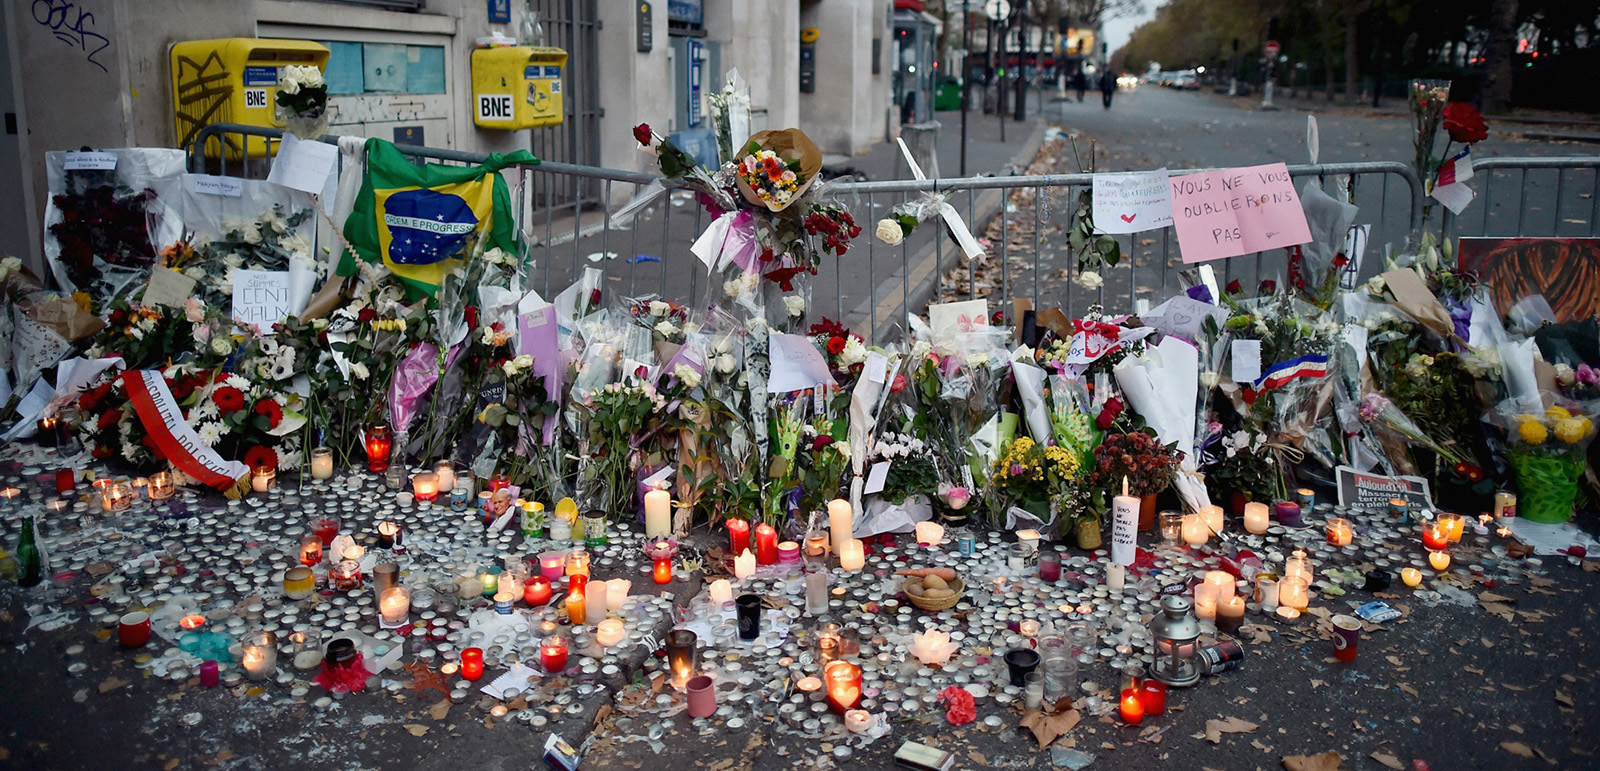 PARIS, FRANCE - NOVEMBER 15: Floweres, candles and tributes cover the pavement near the scene of Friday's Bataclan Theatre terrorist attack on November 15, 2015 in Paris, France. As France observes three days of national mourning members of the public continue to pay tribute to the victims of Friday's deadly attacks. A special service for the families of the victims and survivors is to be held at Notre Dame Cathedral later on Sunday. (Photo by Jeff J Mitchell/Getty Images)